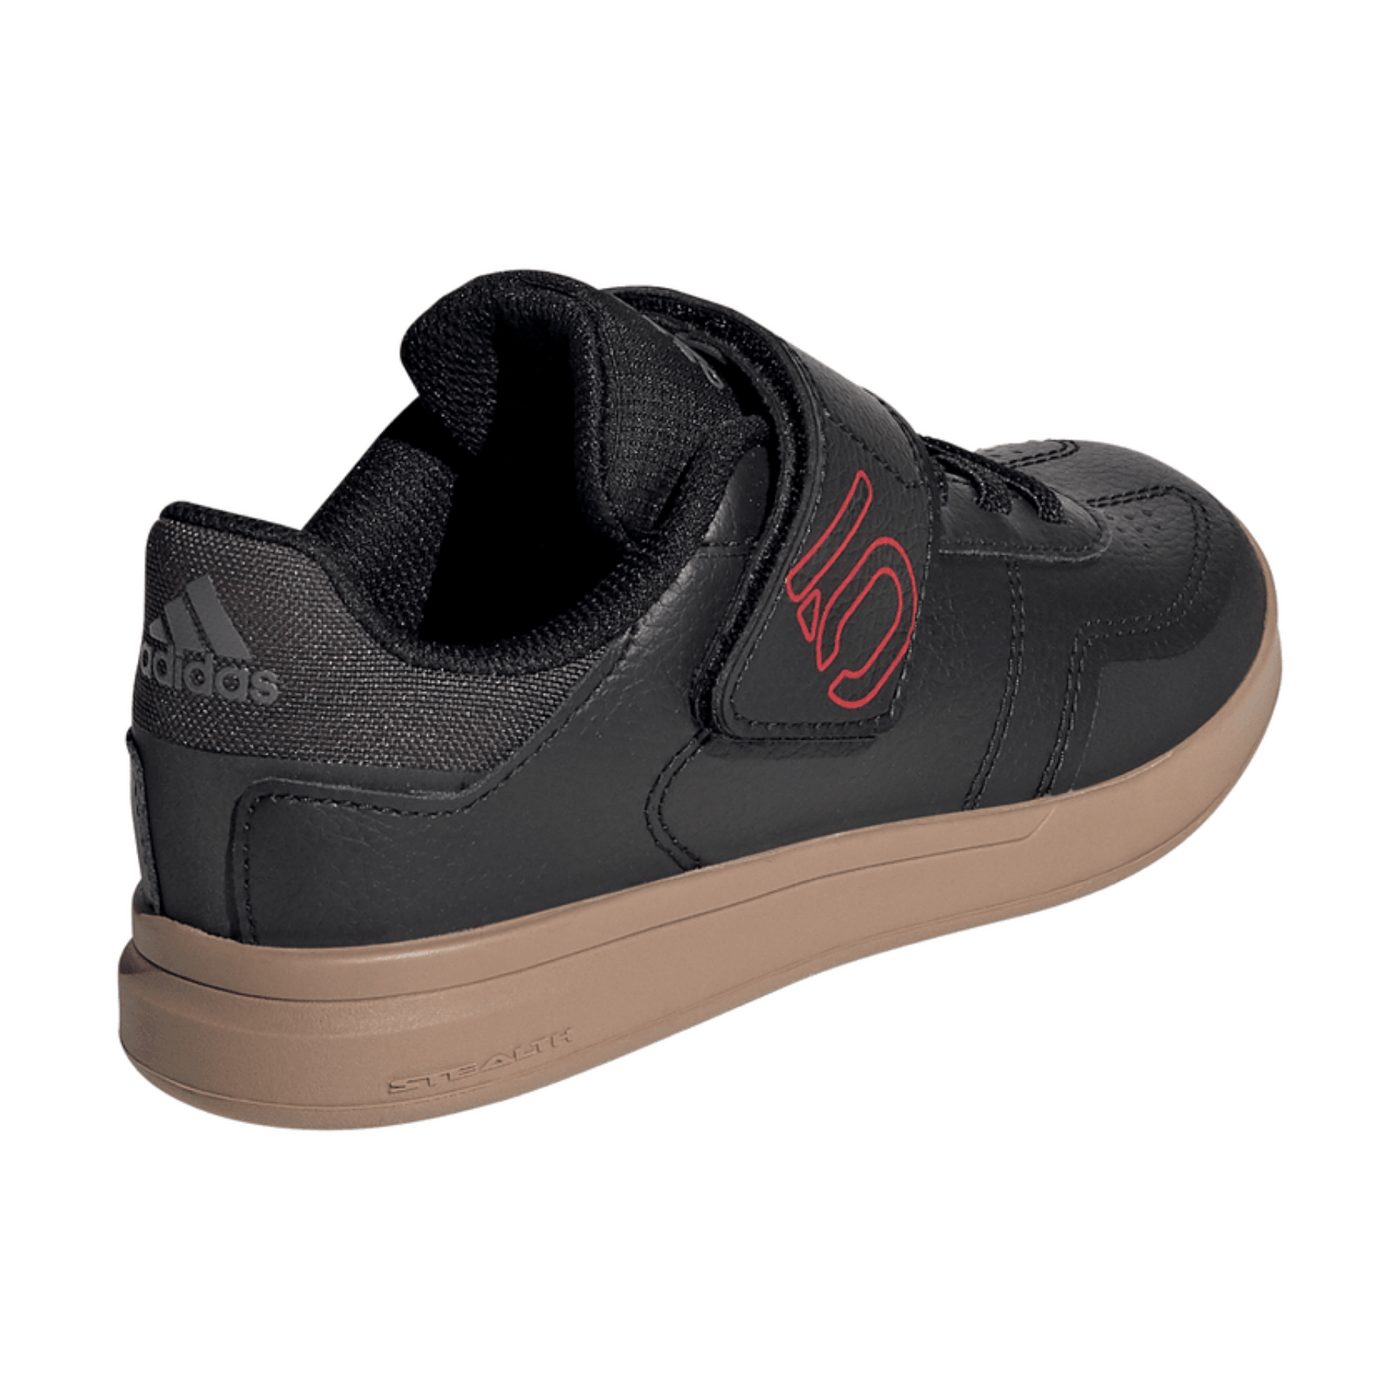 Five Ten Kids Shoes Sleuth DLX - Black 8Lines Shop - Fast Shipping